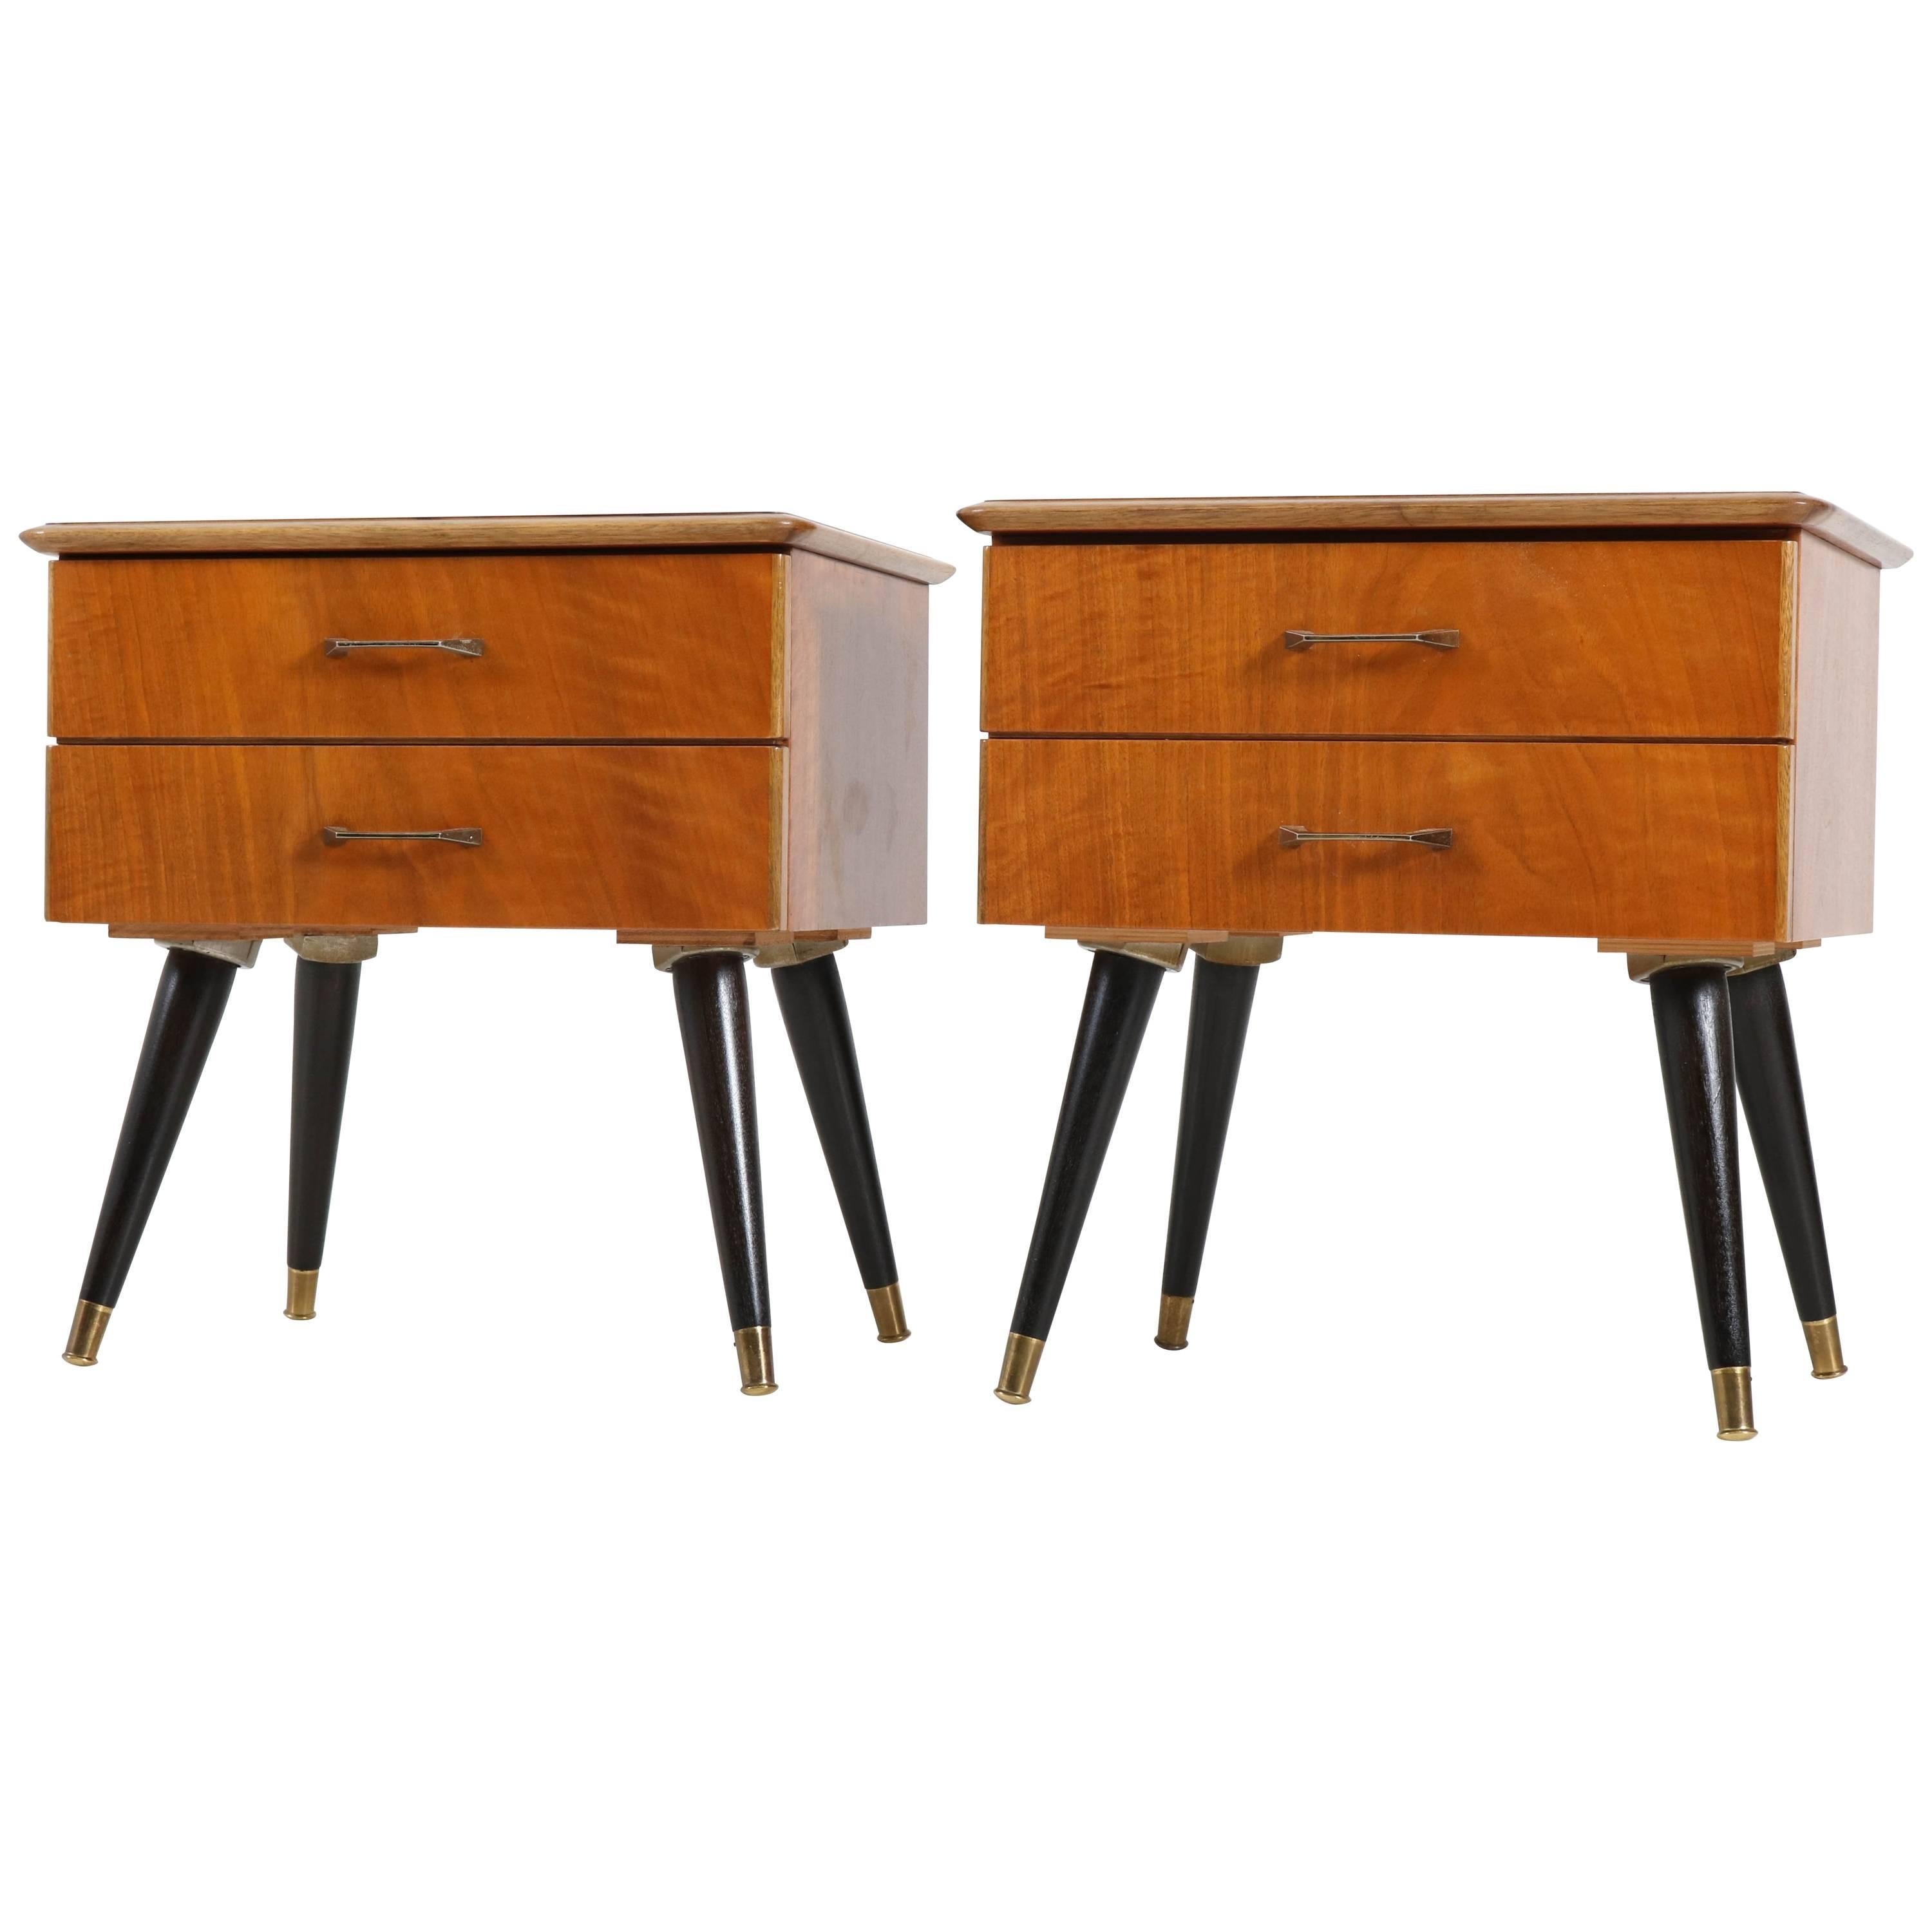 Pair of Italian Mid-Century Modern Nightstands or Bedside Tables, 1950s